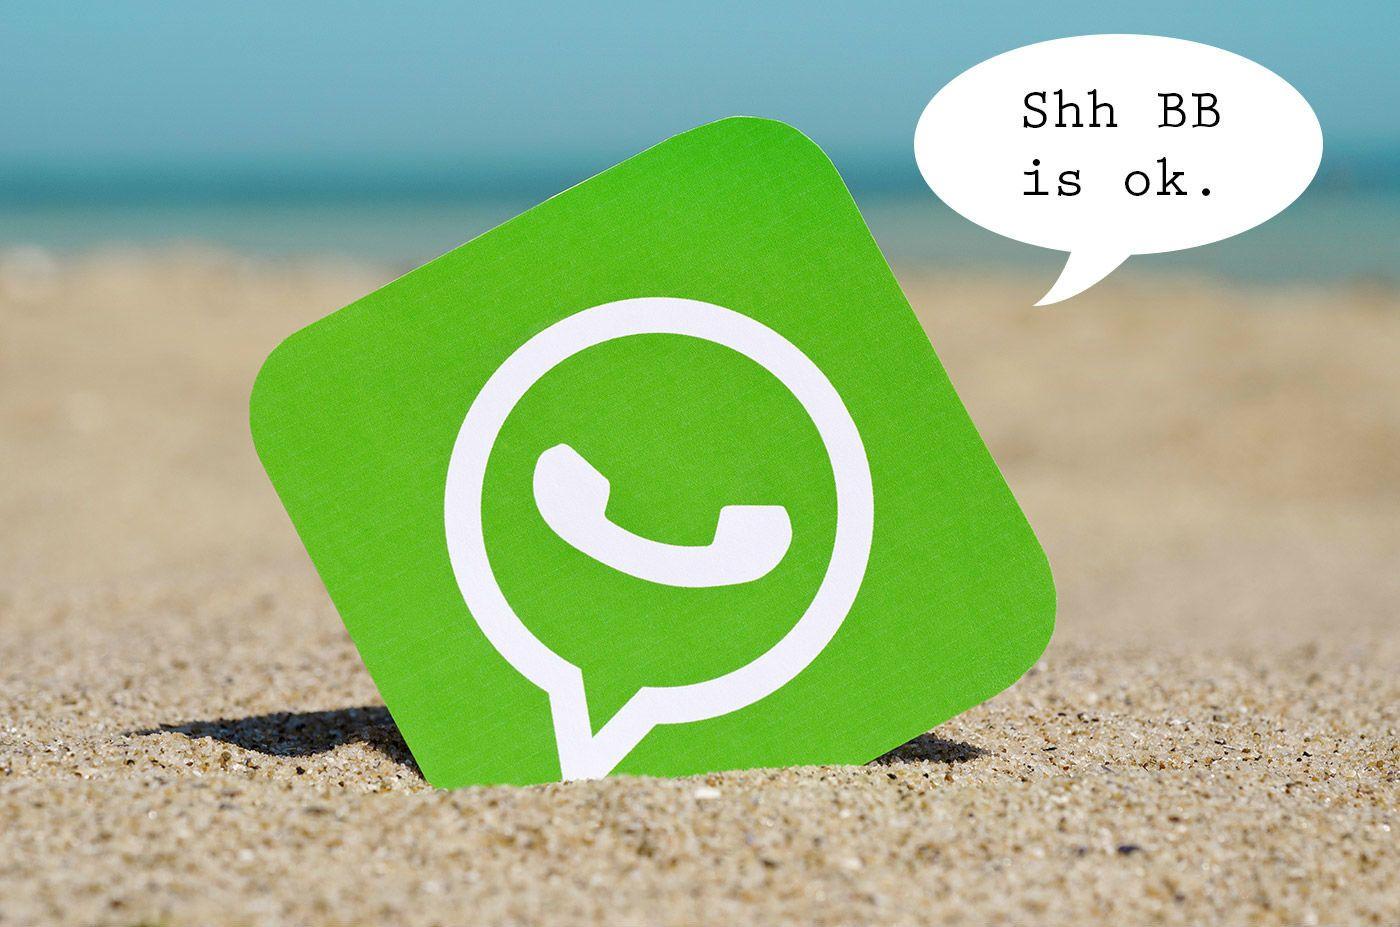 BlackBerry OS Logo - WhatsApp will ditch Blackberry OS and Windows Phone by New Year's